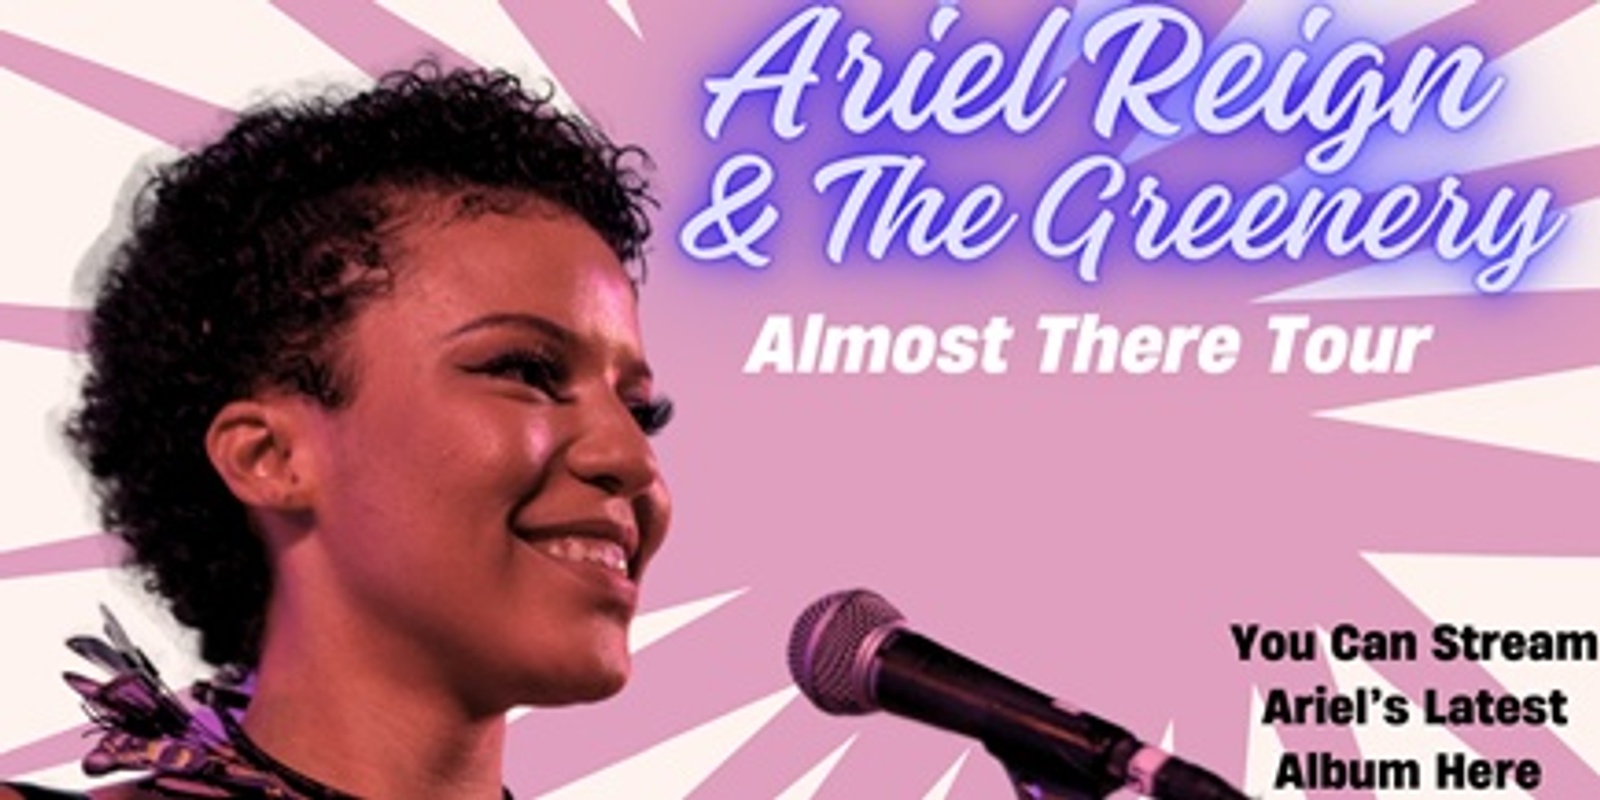 Banner image for Ariel Reign & The Greenery